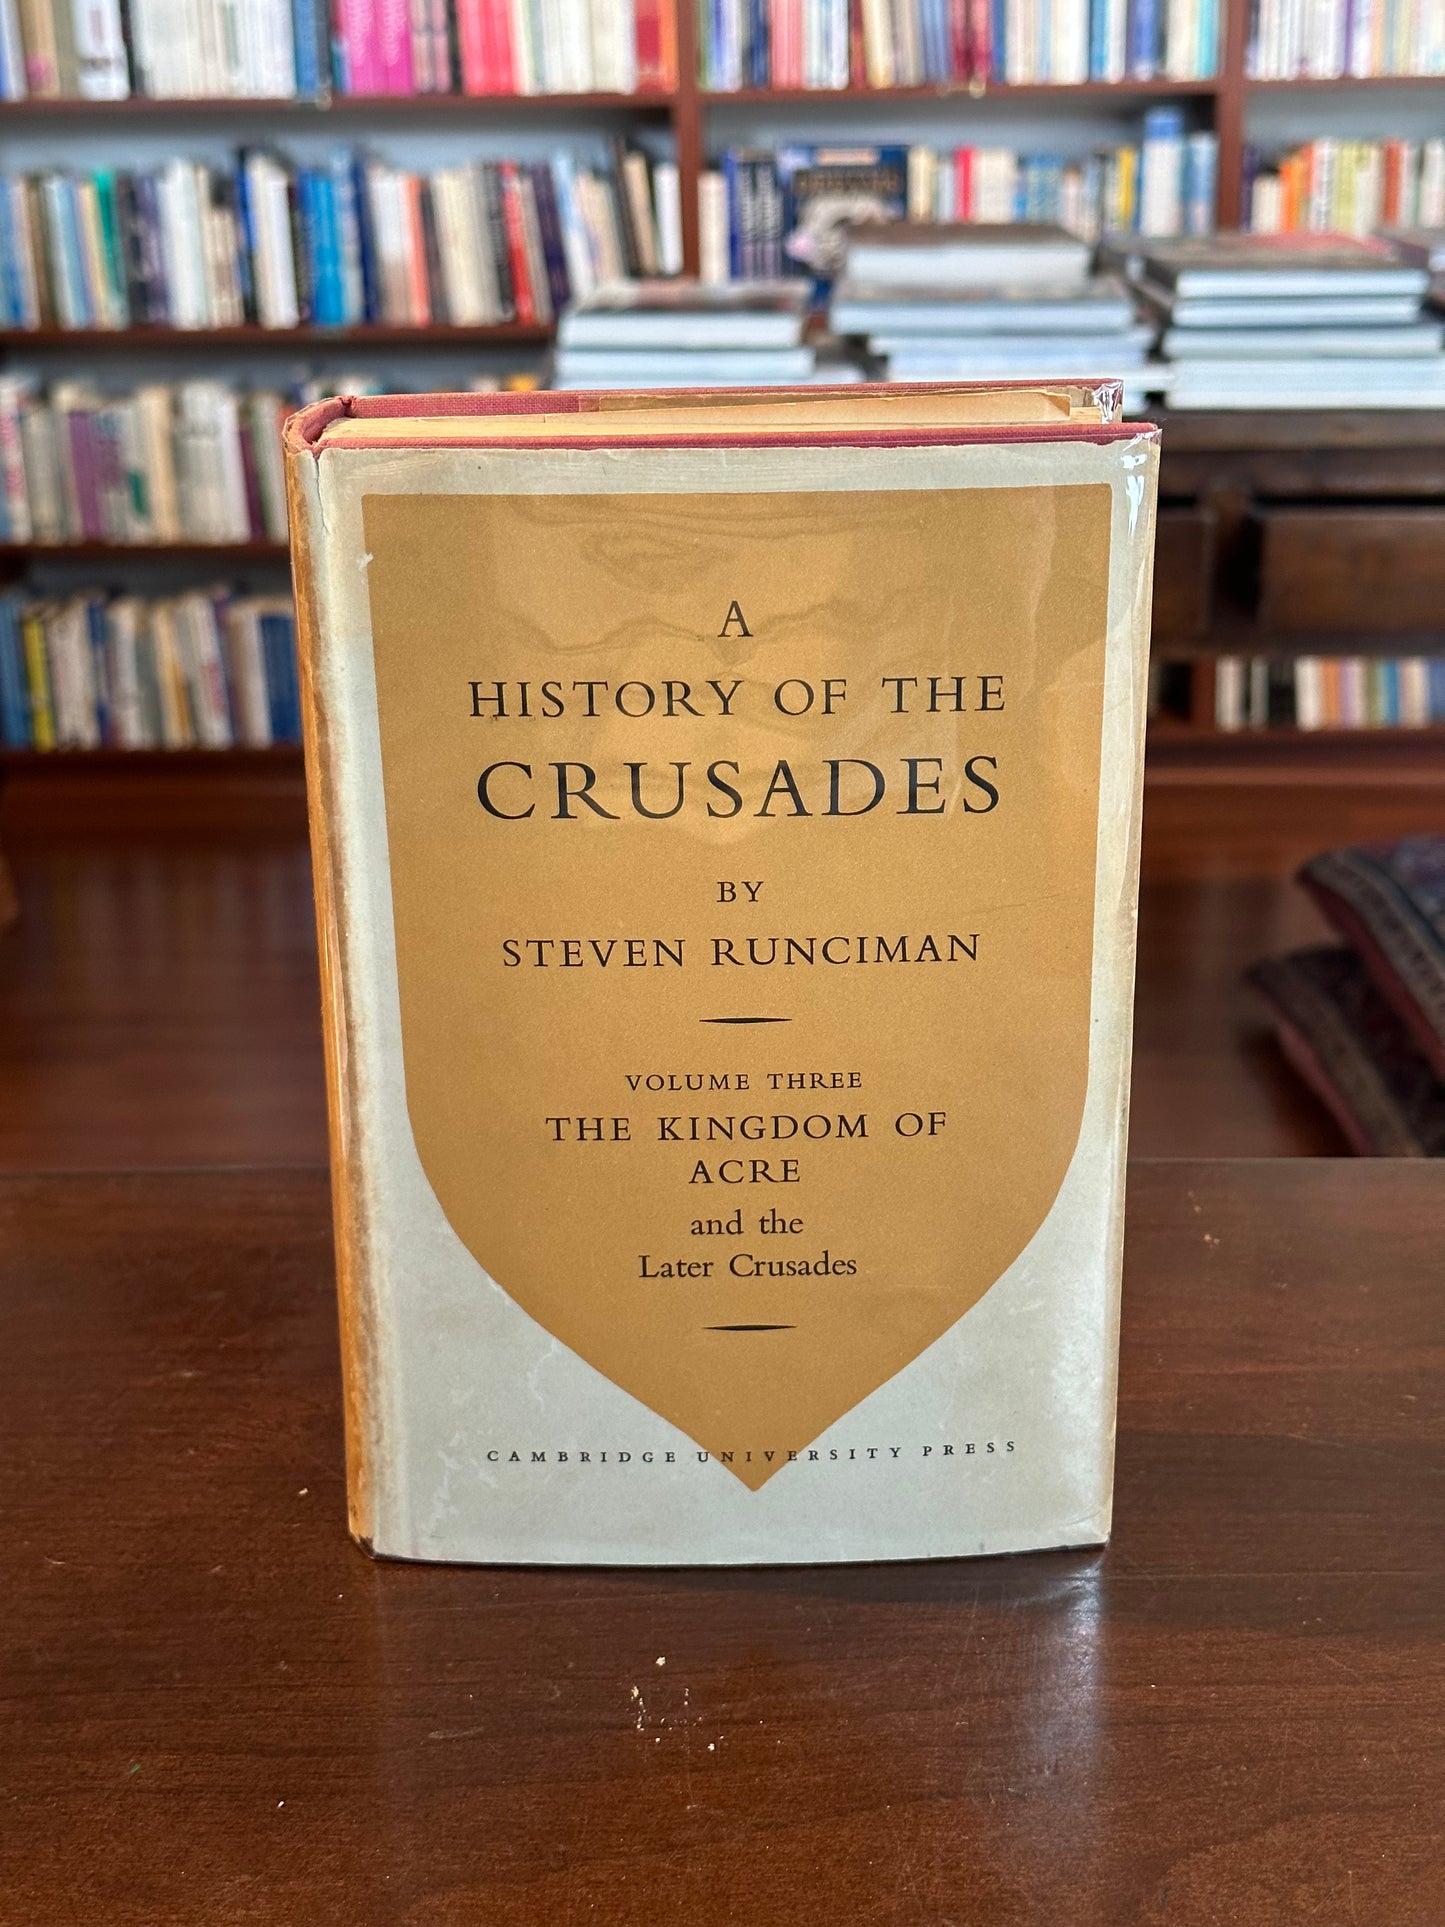 A History of The Crusades by Steven Runciman